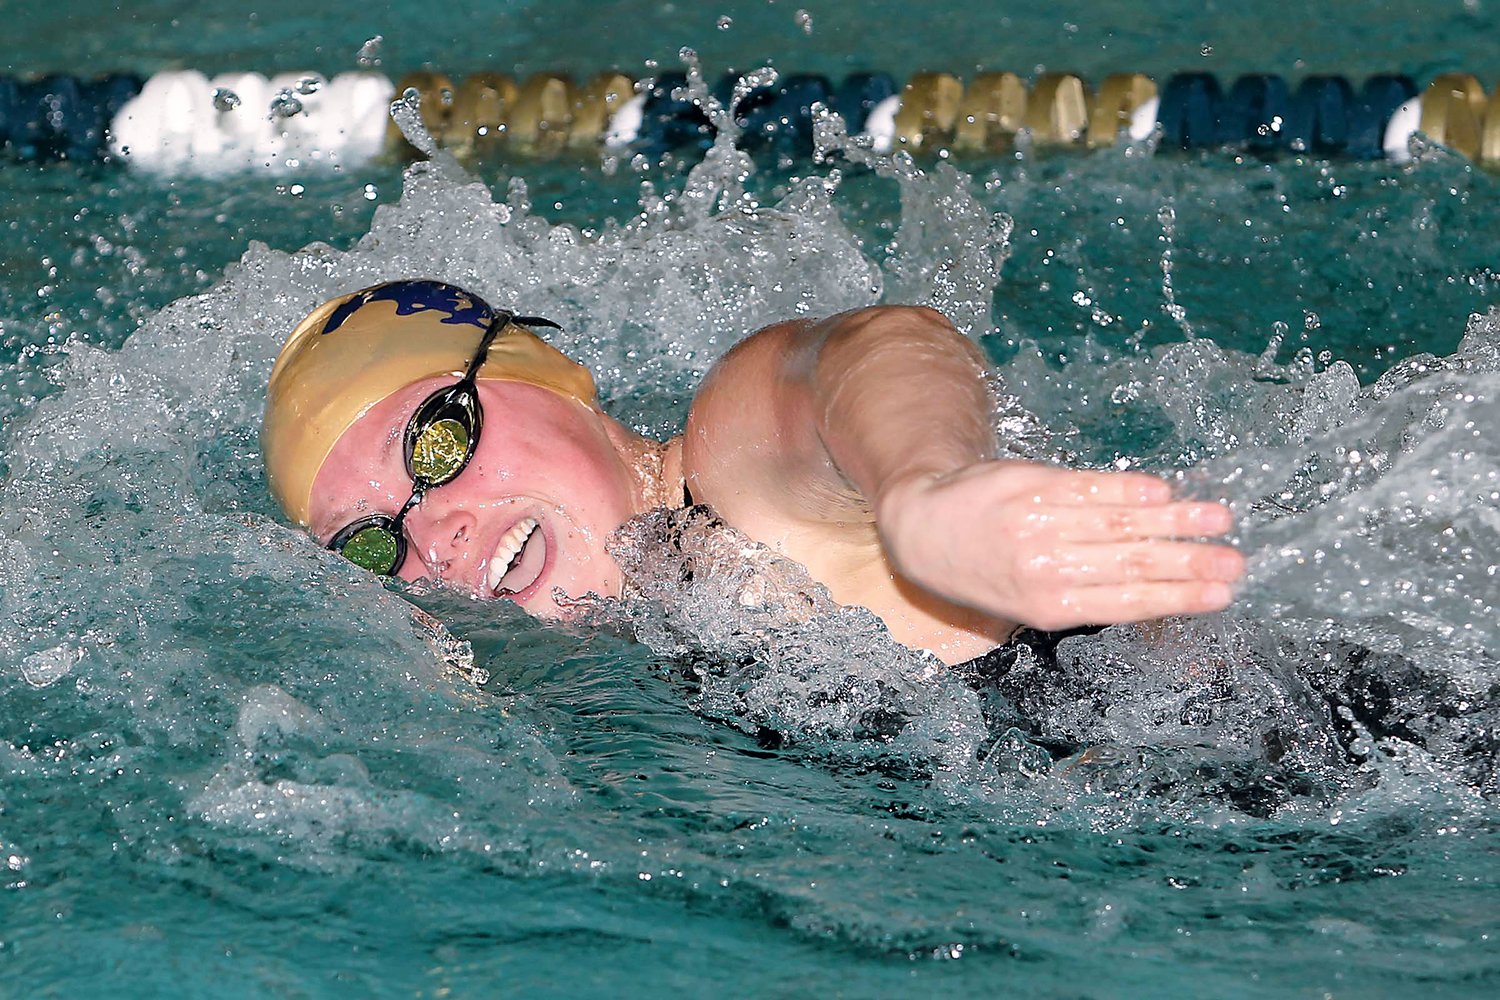 Fountain Central's Clare McGrady won 14 sectional titles as a swimmer.